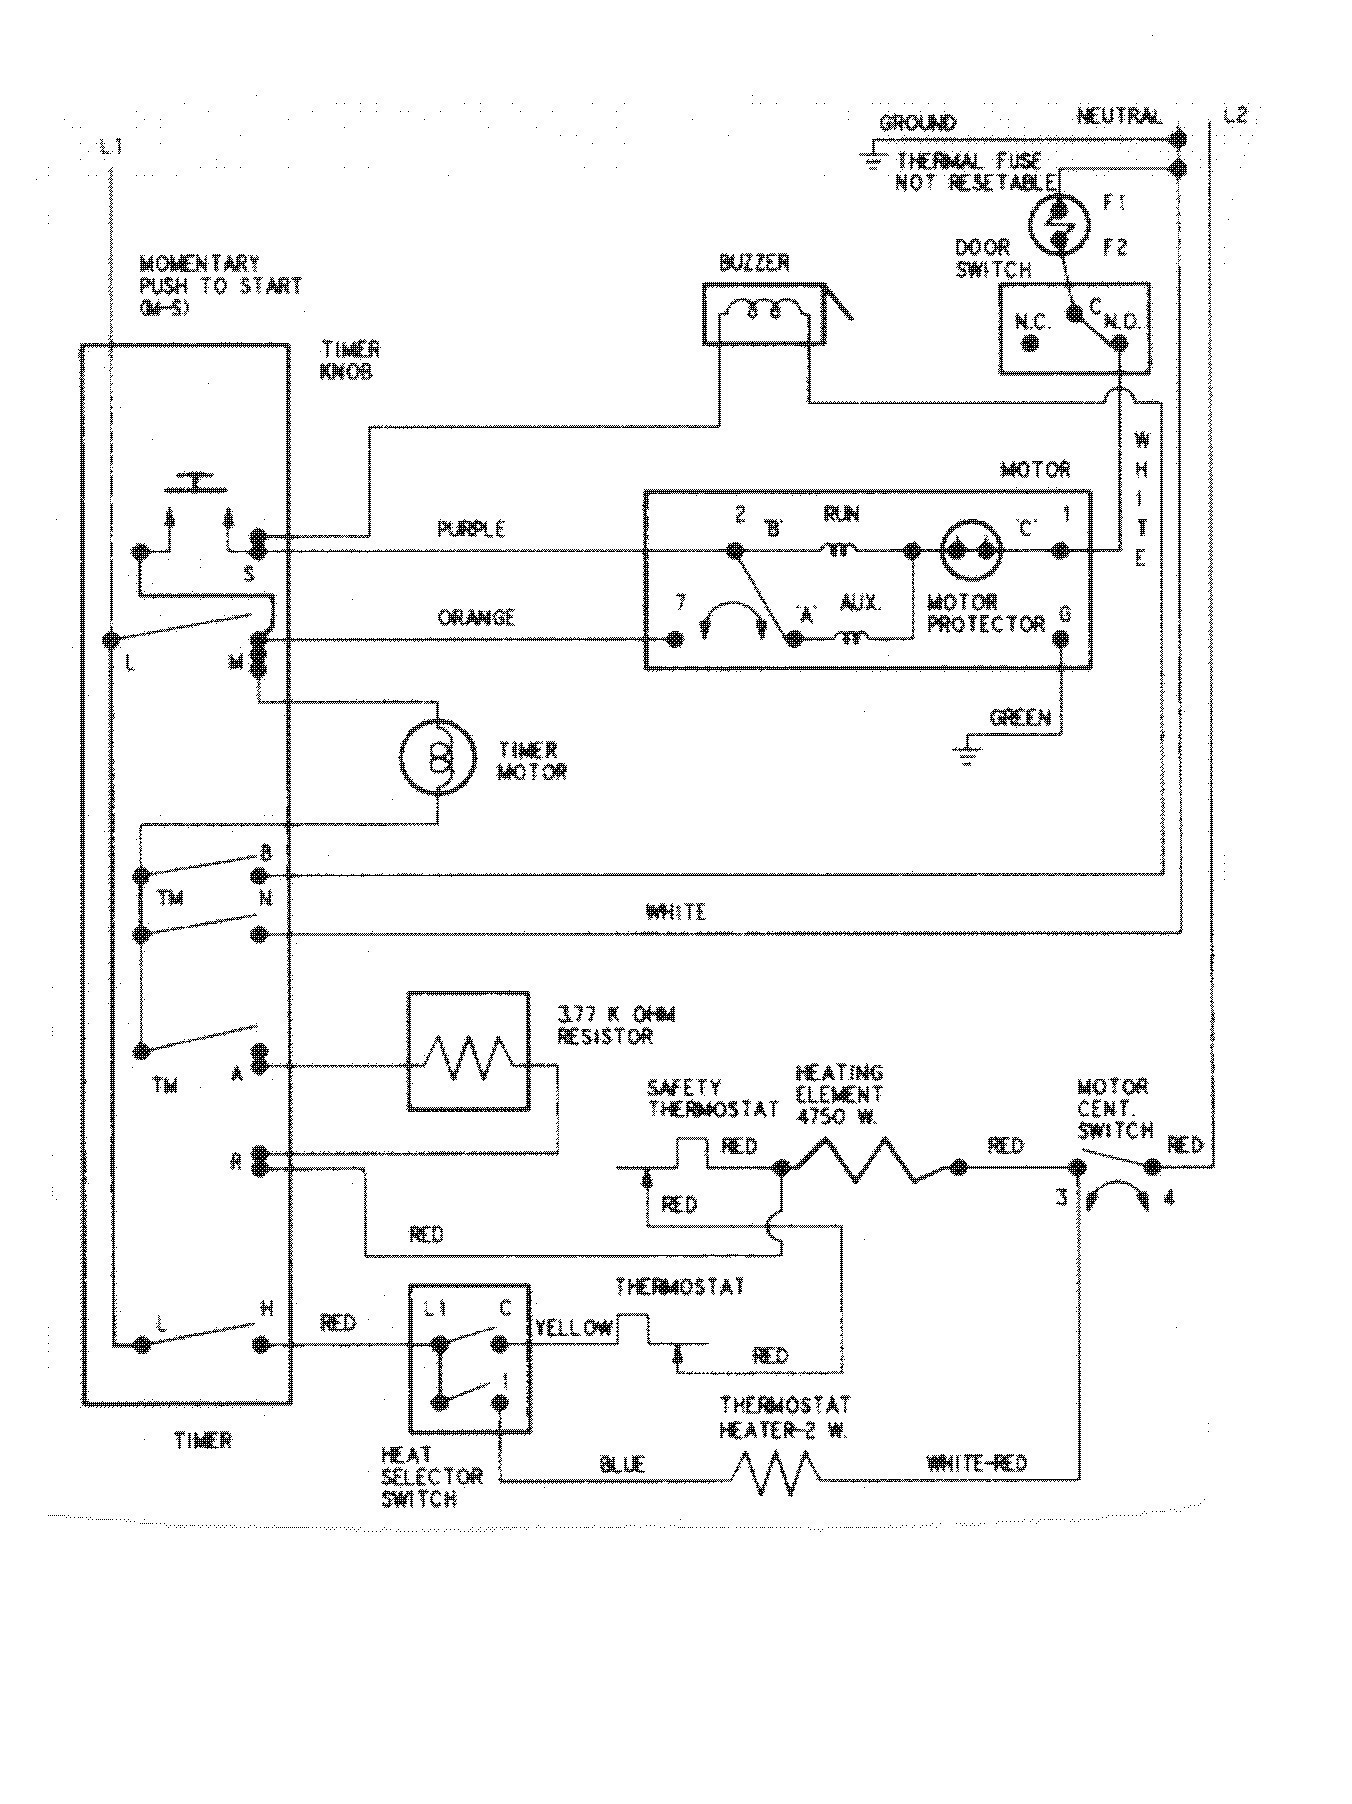 Wiring Diagram for Whirlpool Dryer Ge Gas Dryer Wiring Diagram Refrence Ge Gas Dryer Wiring Diagram Of Wiring Diagram for Whirlpool Dryer